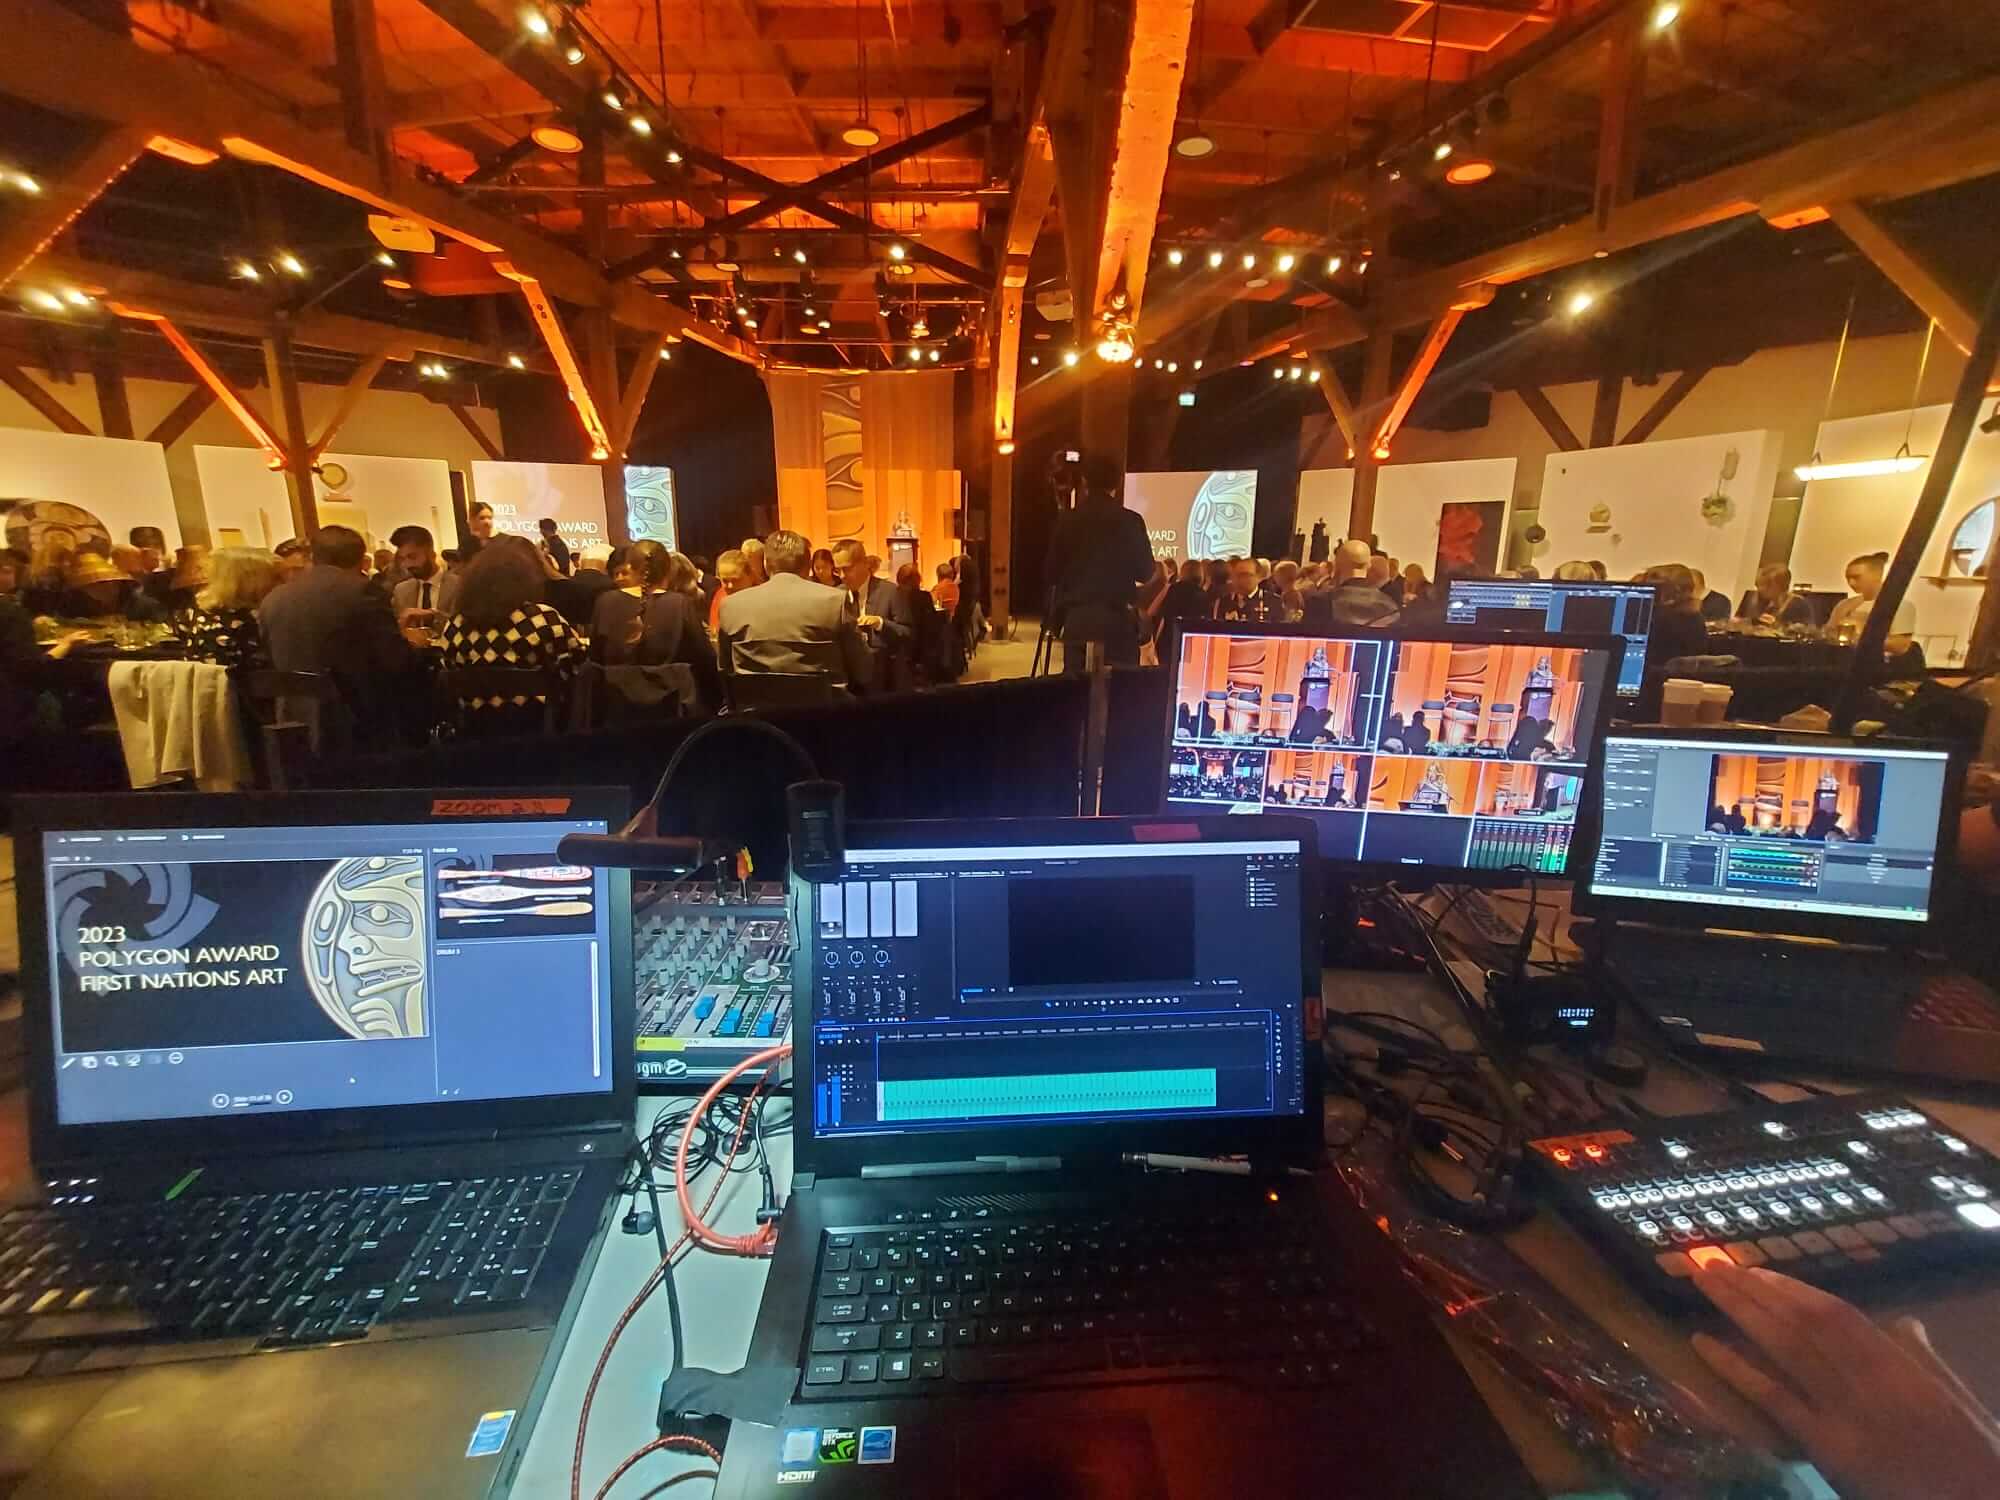  A room with multiple laptops and a large screen, set up for an AV mobile event with live streaming. Client: BCAF